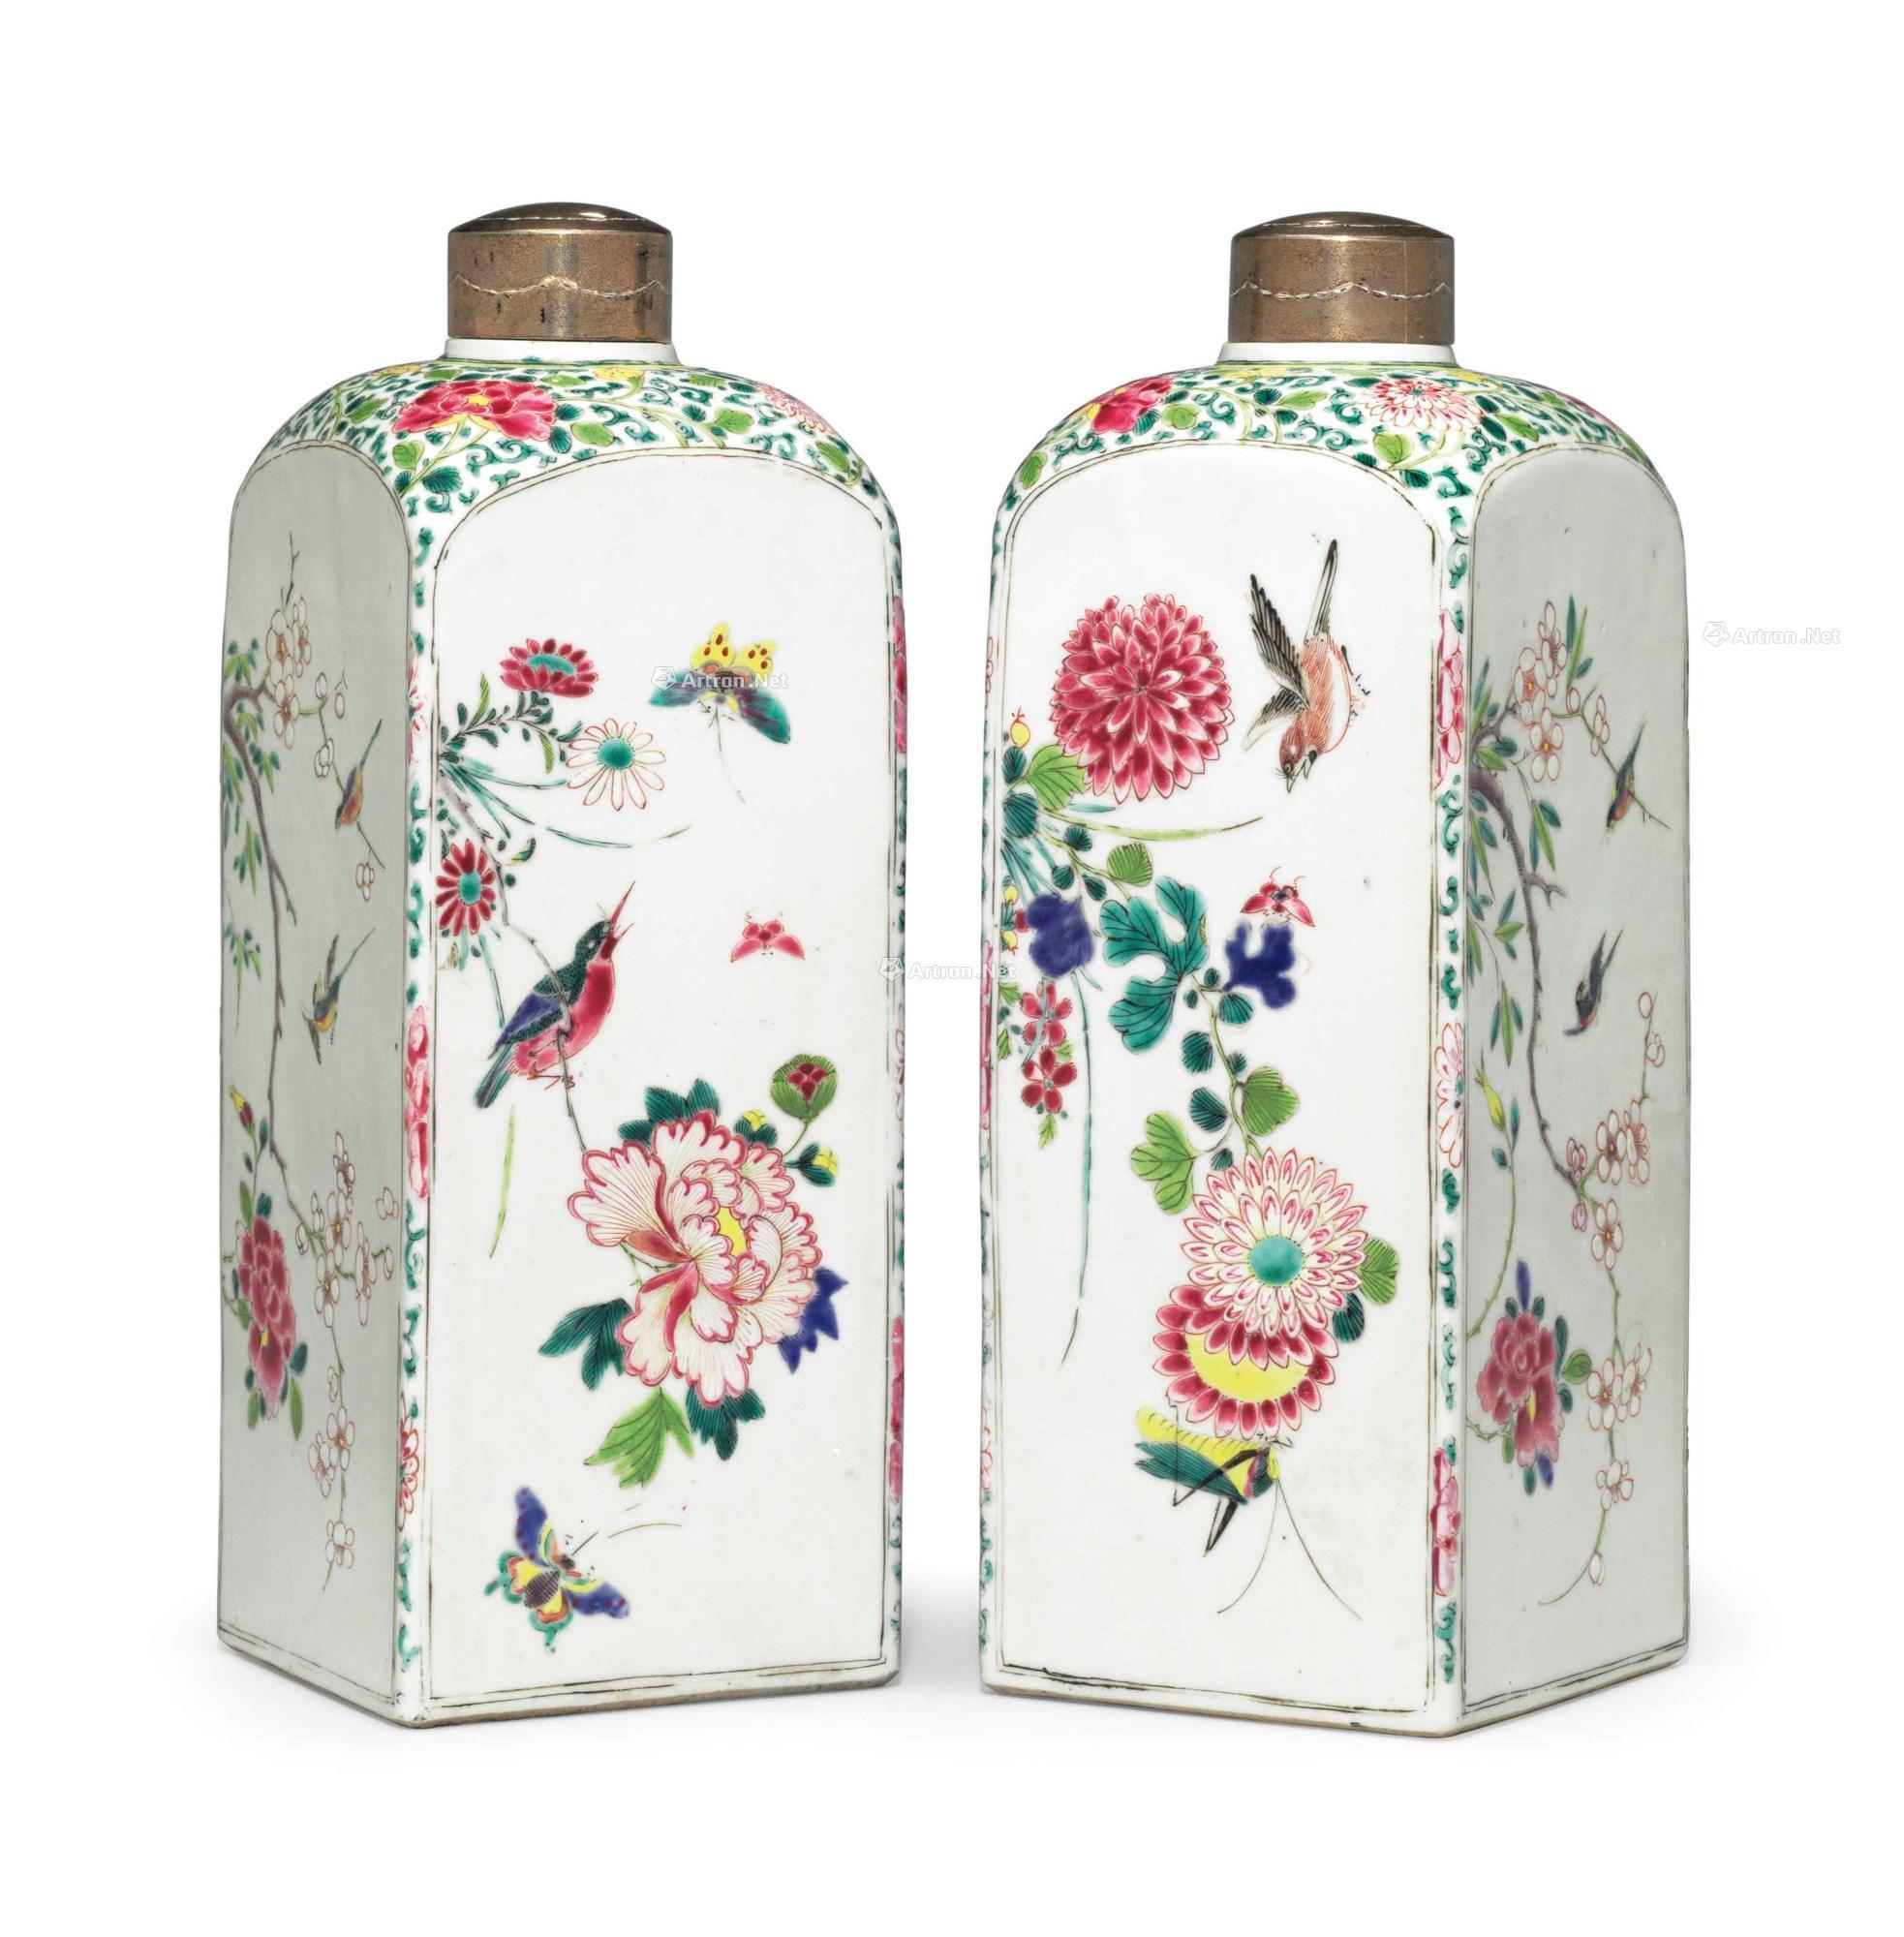 Qianlong period, about 1750 A PAIR OF FAMILLE ROSE SQUARE CANISTERS